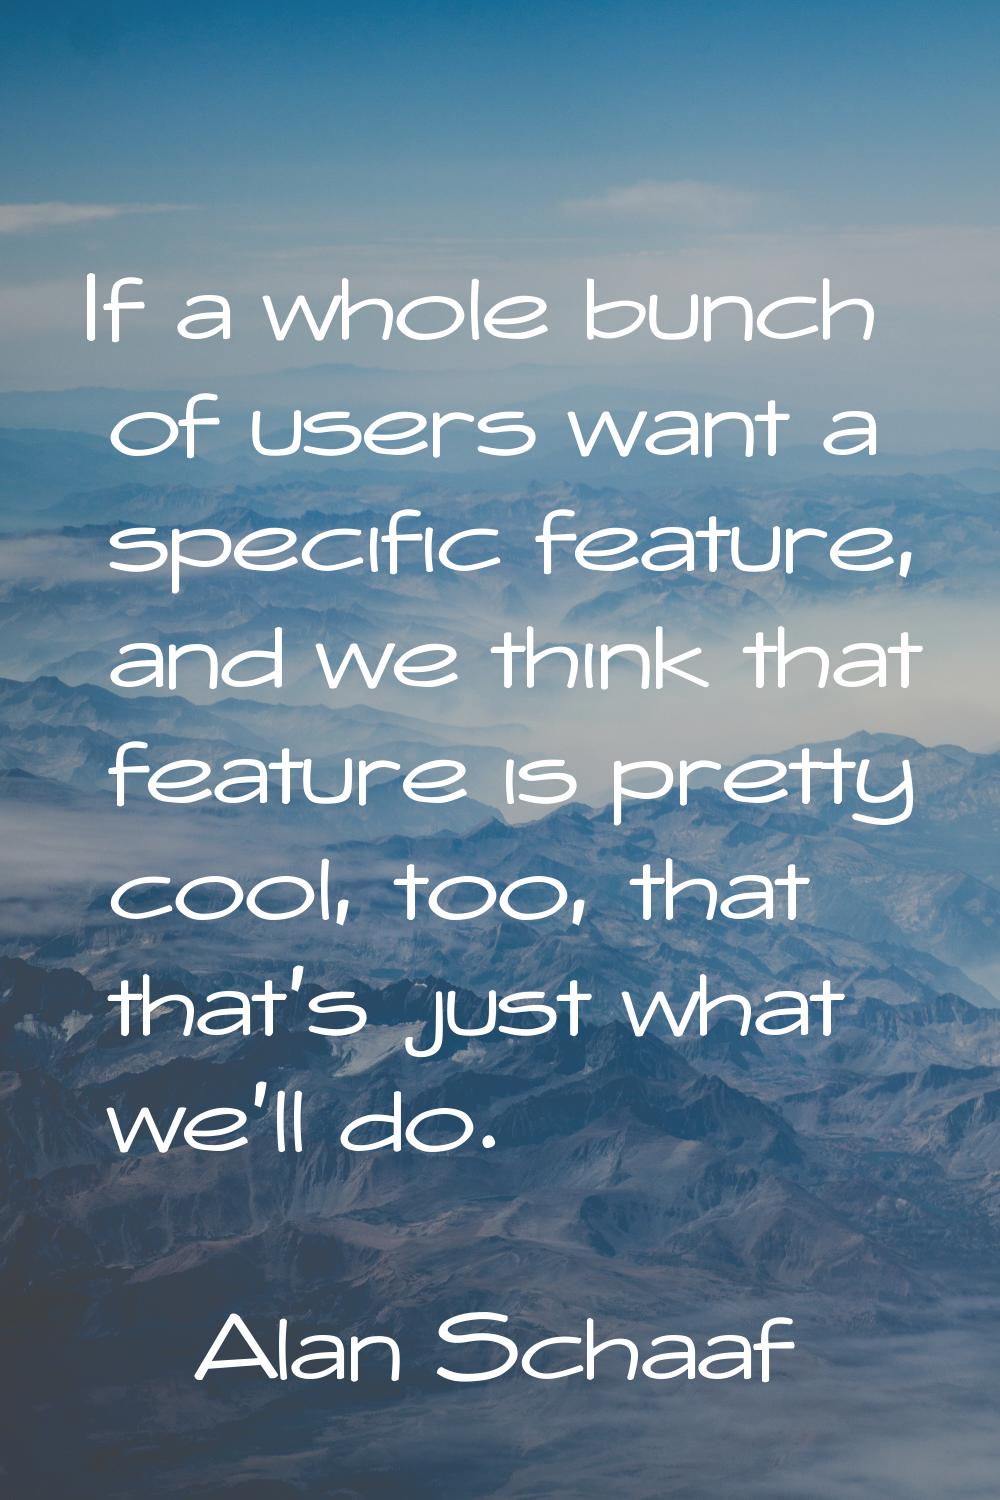 If a whole bunch of users want a specific feature, and we think that feature is pretty cool, too, t